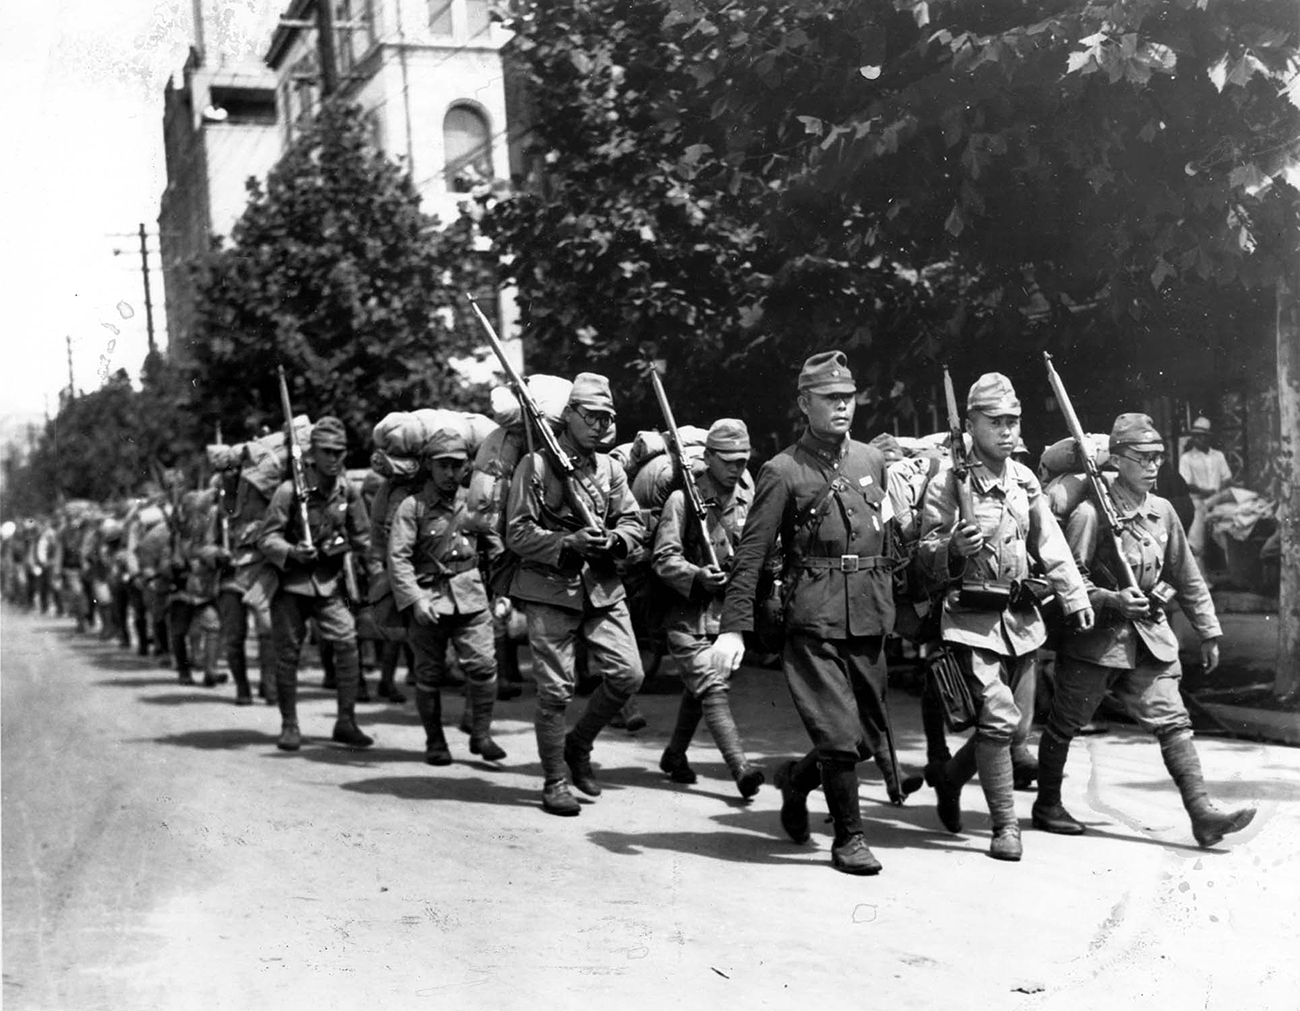 Japanese soldiers marching in Seoul in the 1920s.